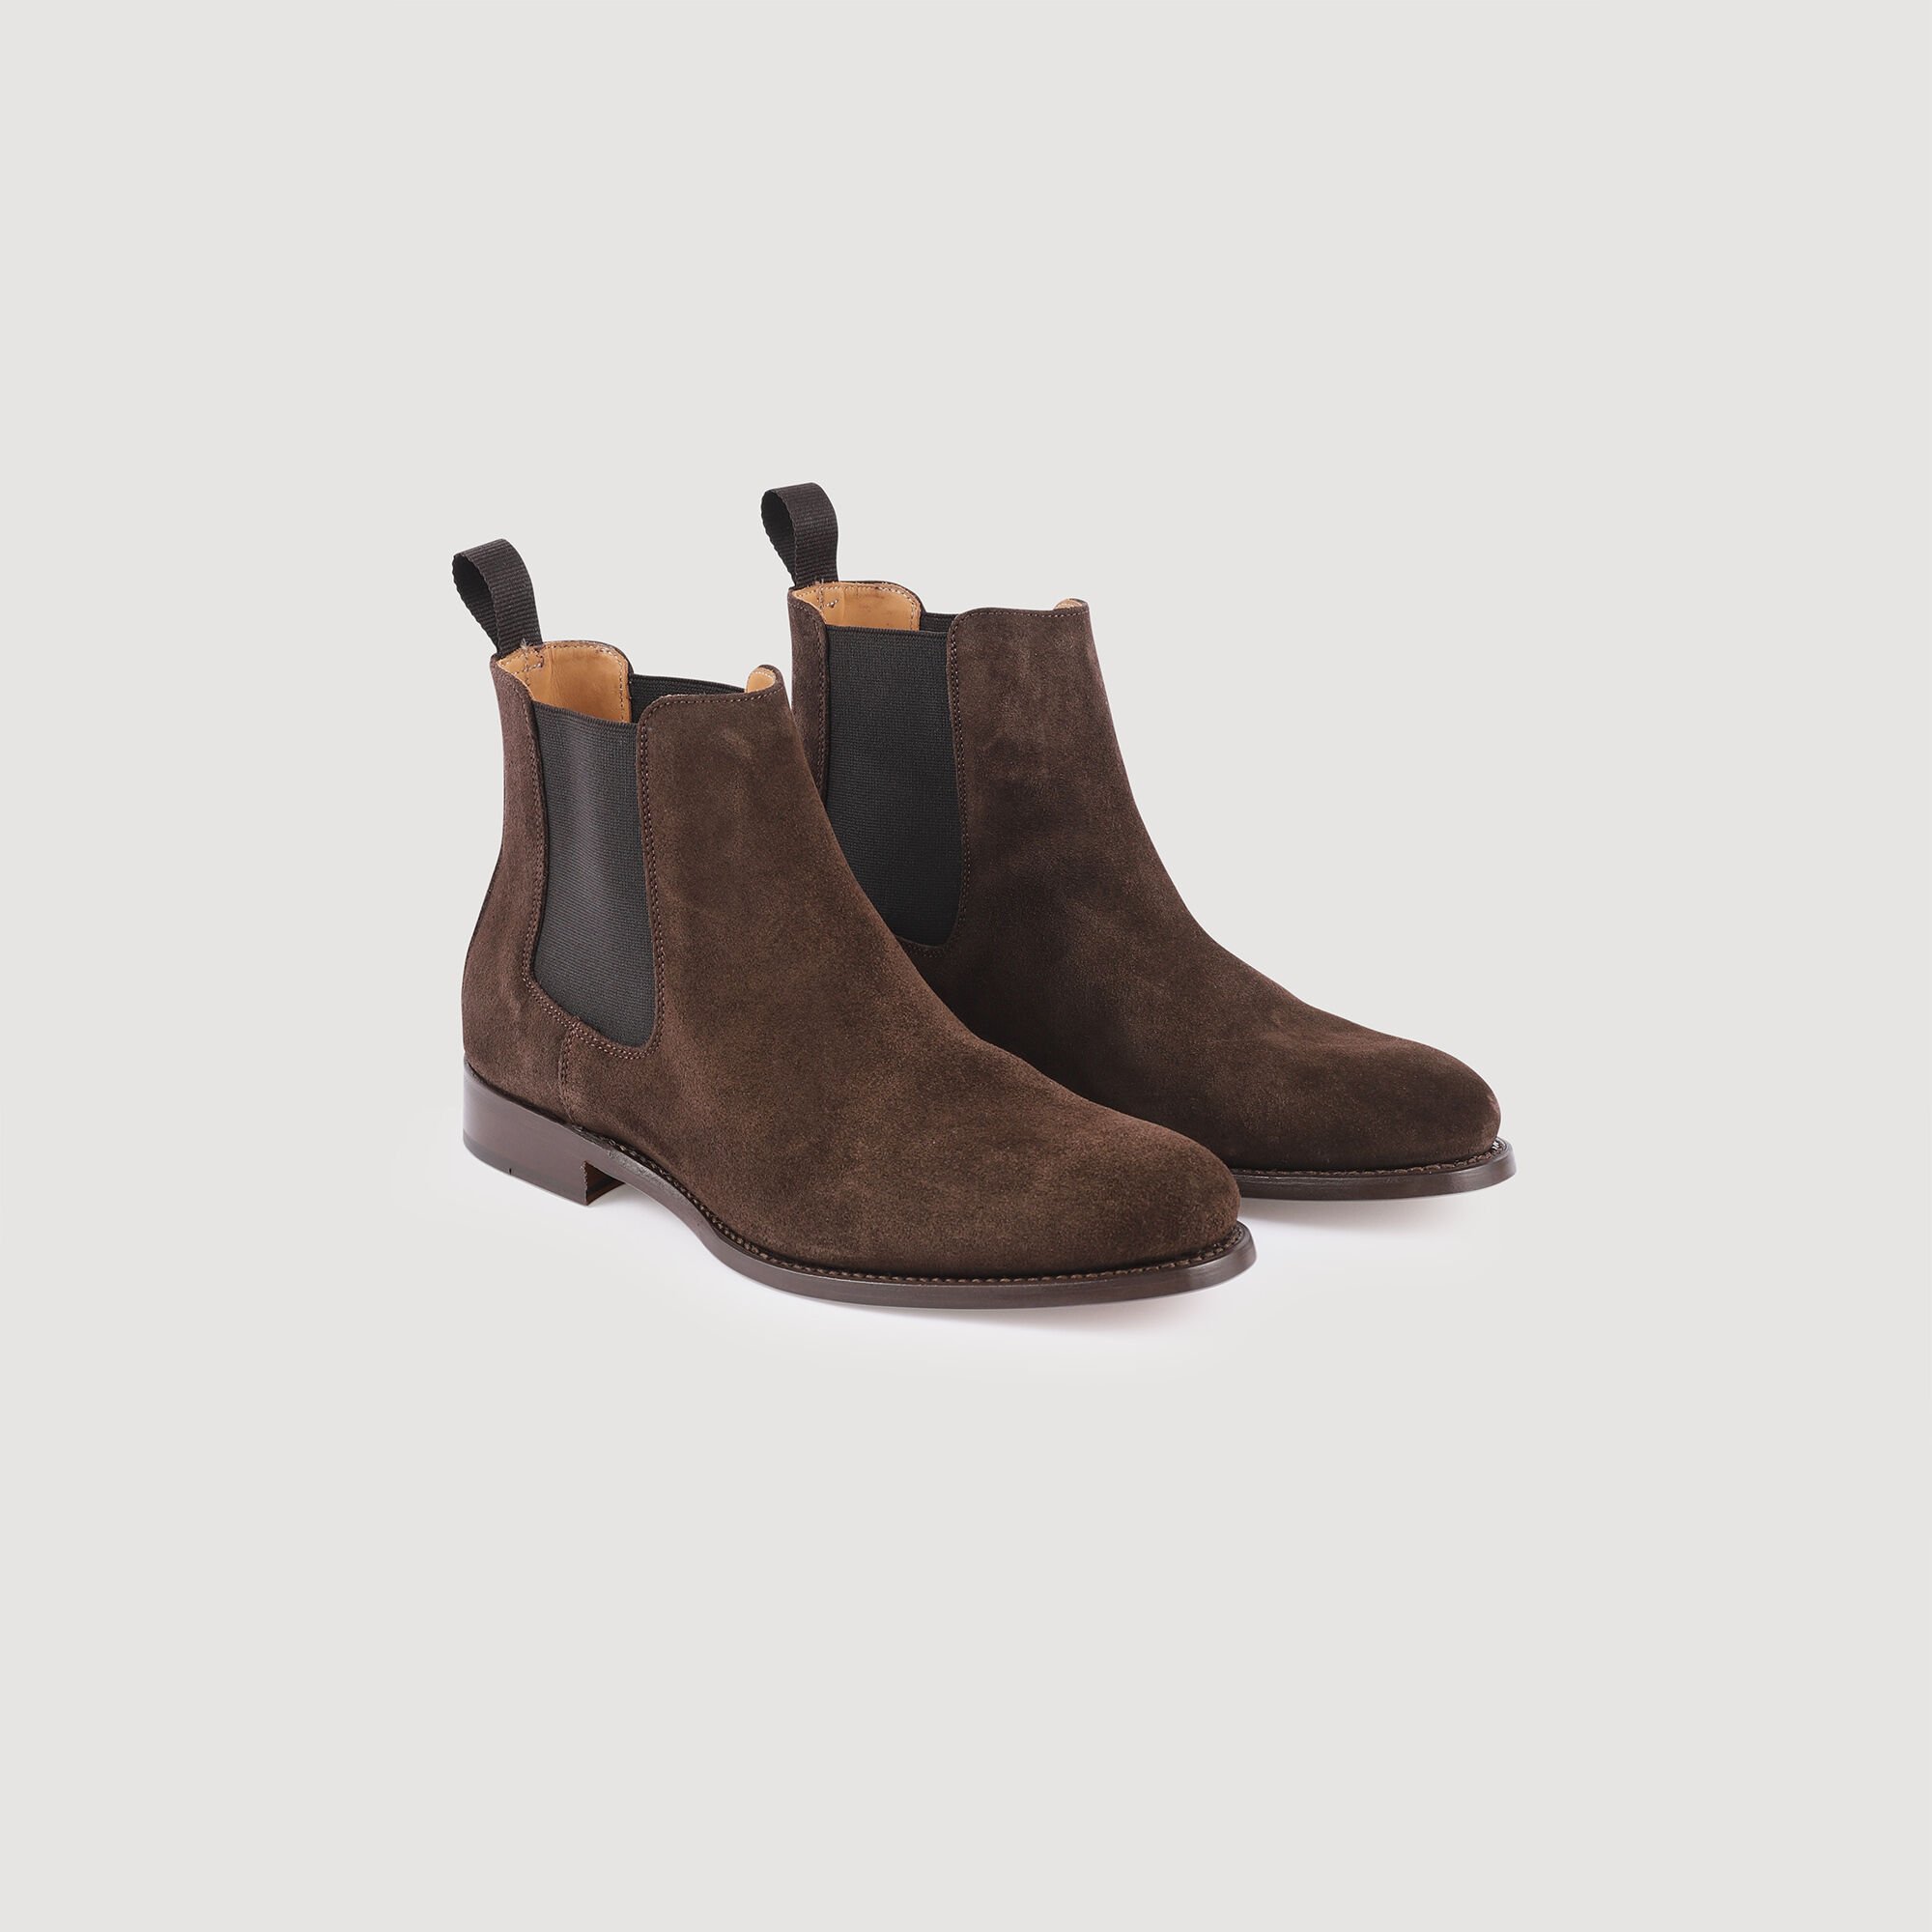 Leather Chelsea ankle boots